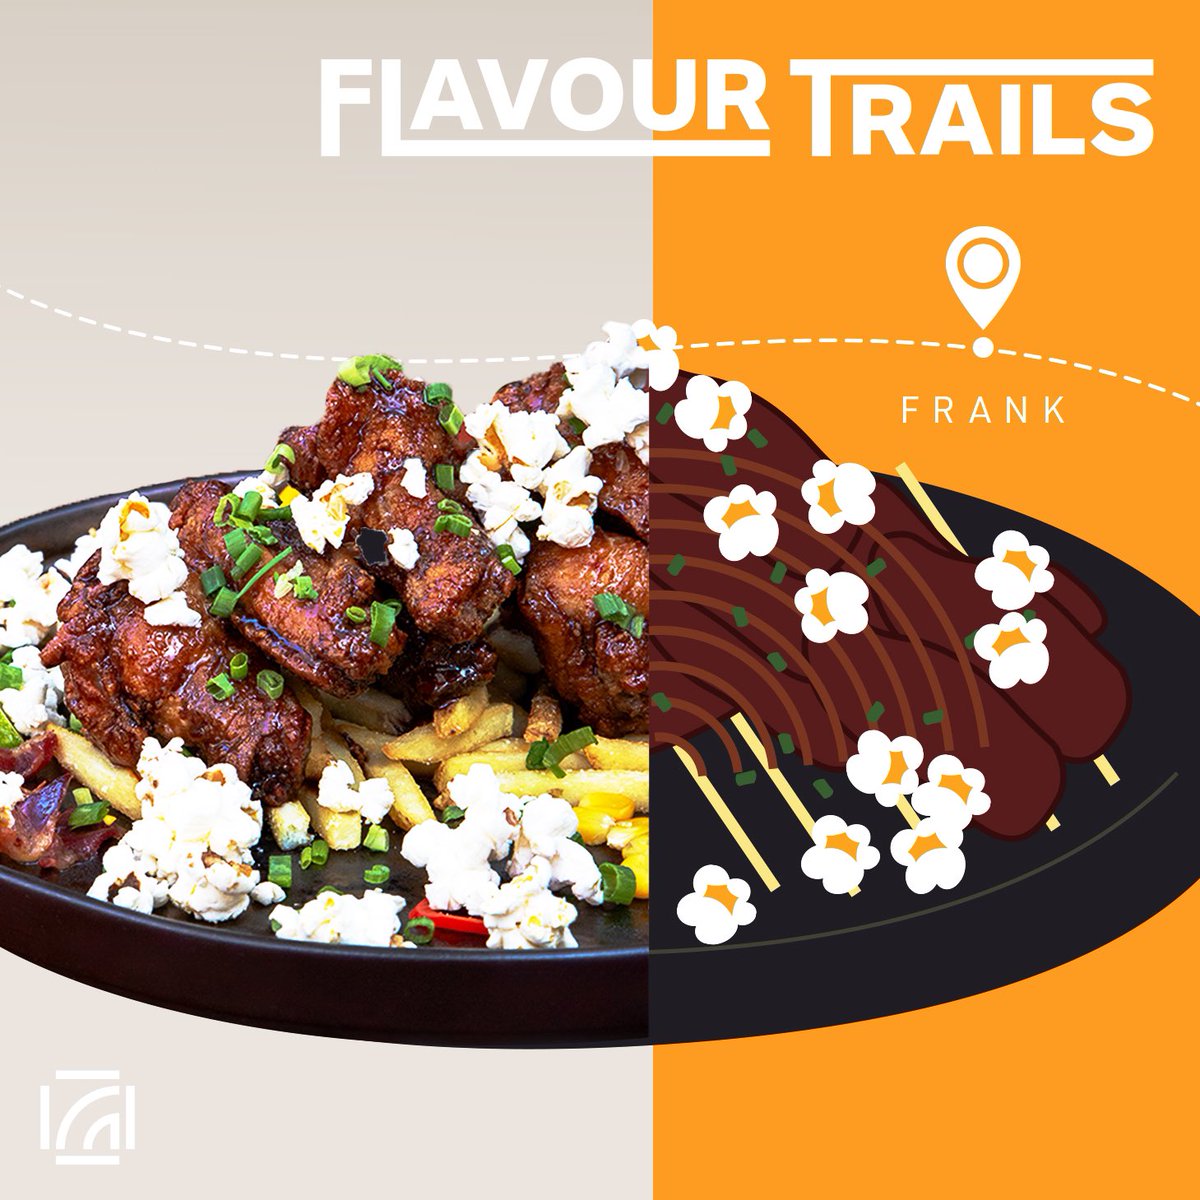 Craving some delicious meat? Head to FRANK in Bluewaters for a spot-on meal in this Dubai Food Festival! 

#BluewatersDubai #PlacesToVisit #ThingsToDo #FRANK #DubaiFoodFestival #DubaiEats